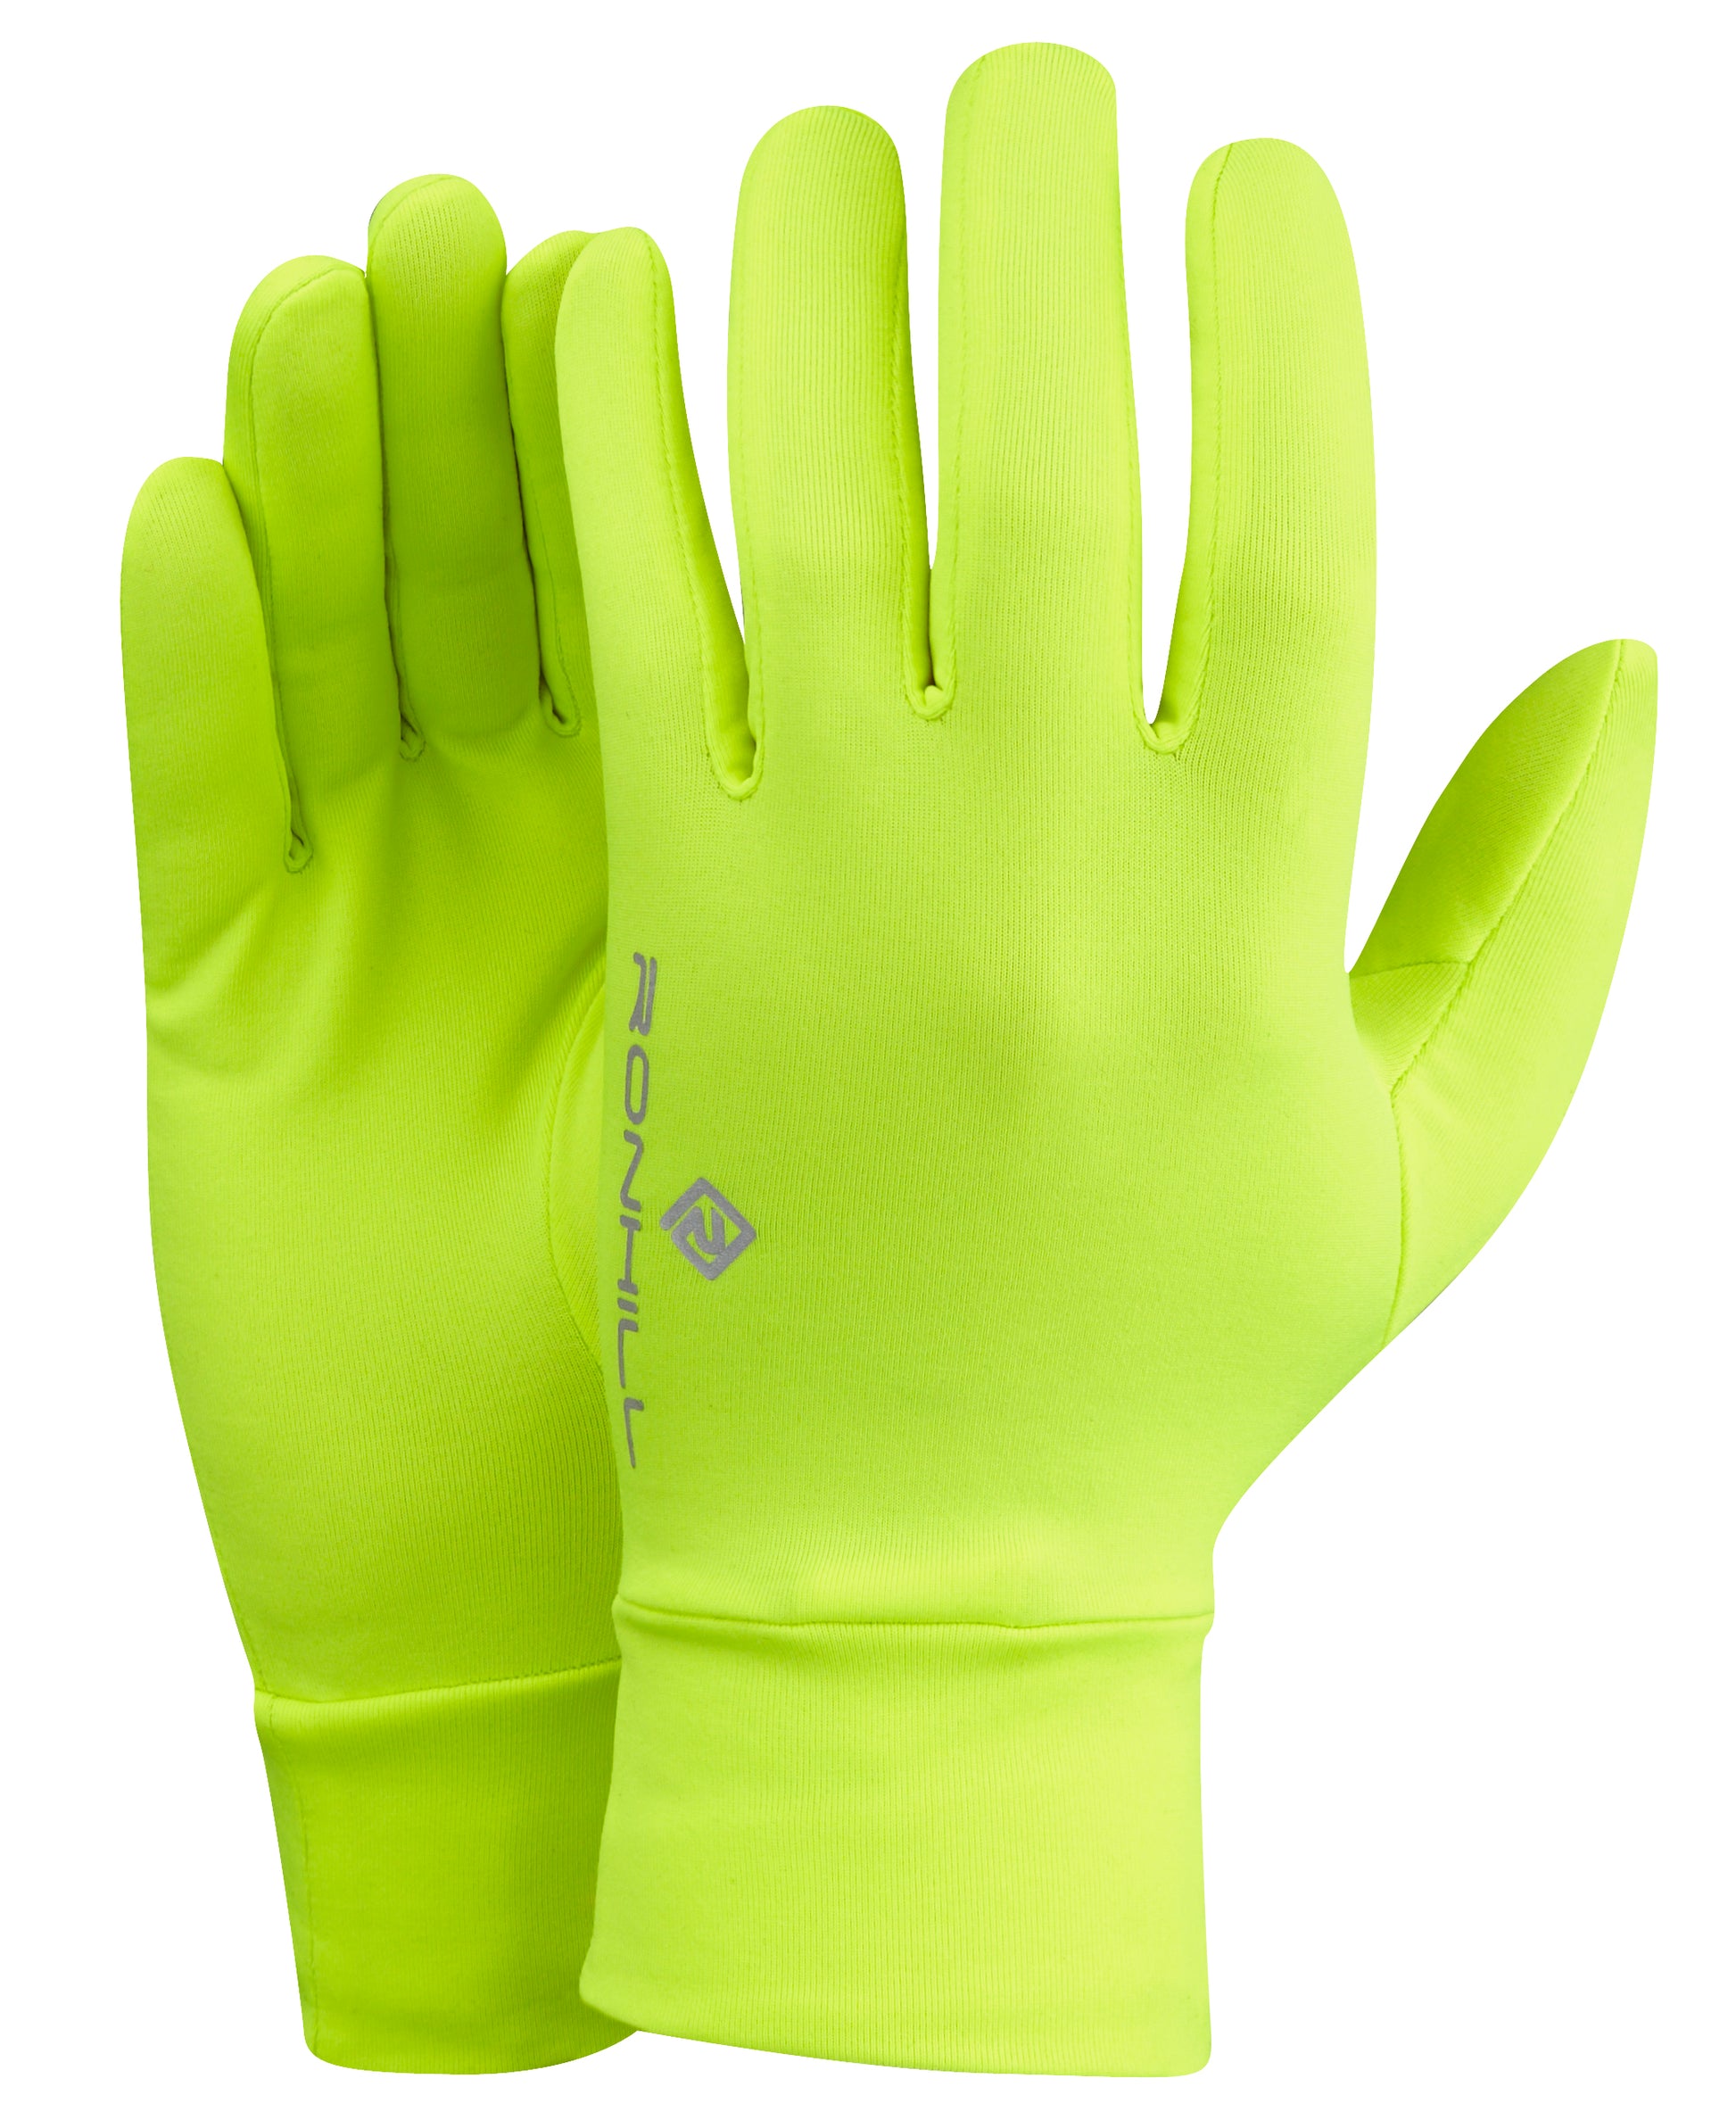 Ronhill classic glove in fluo yellow